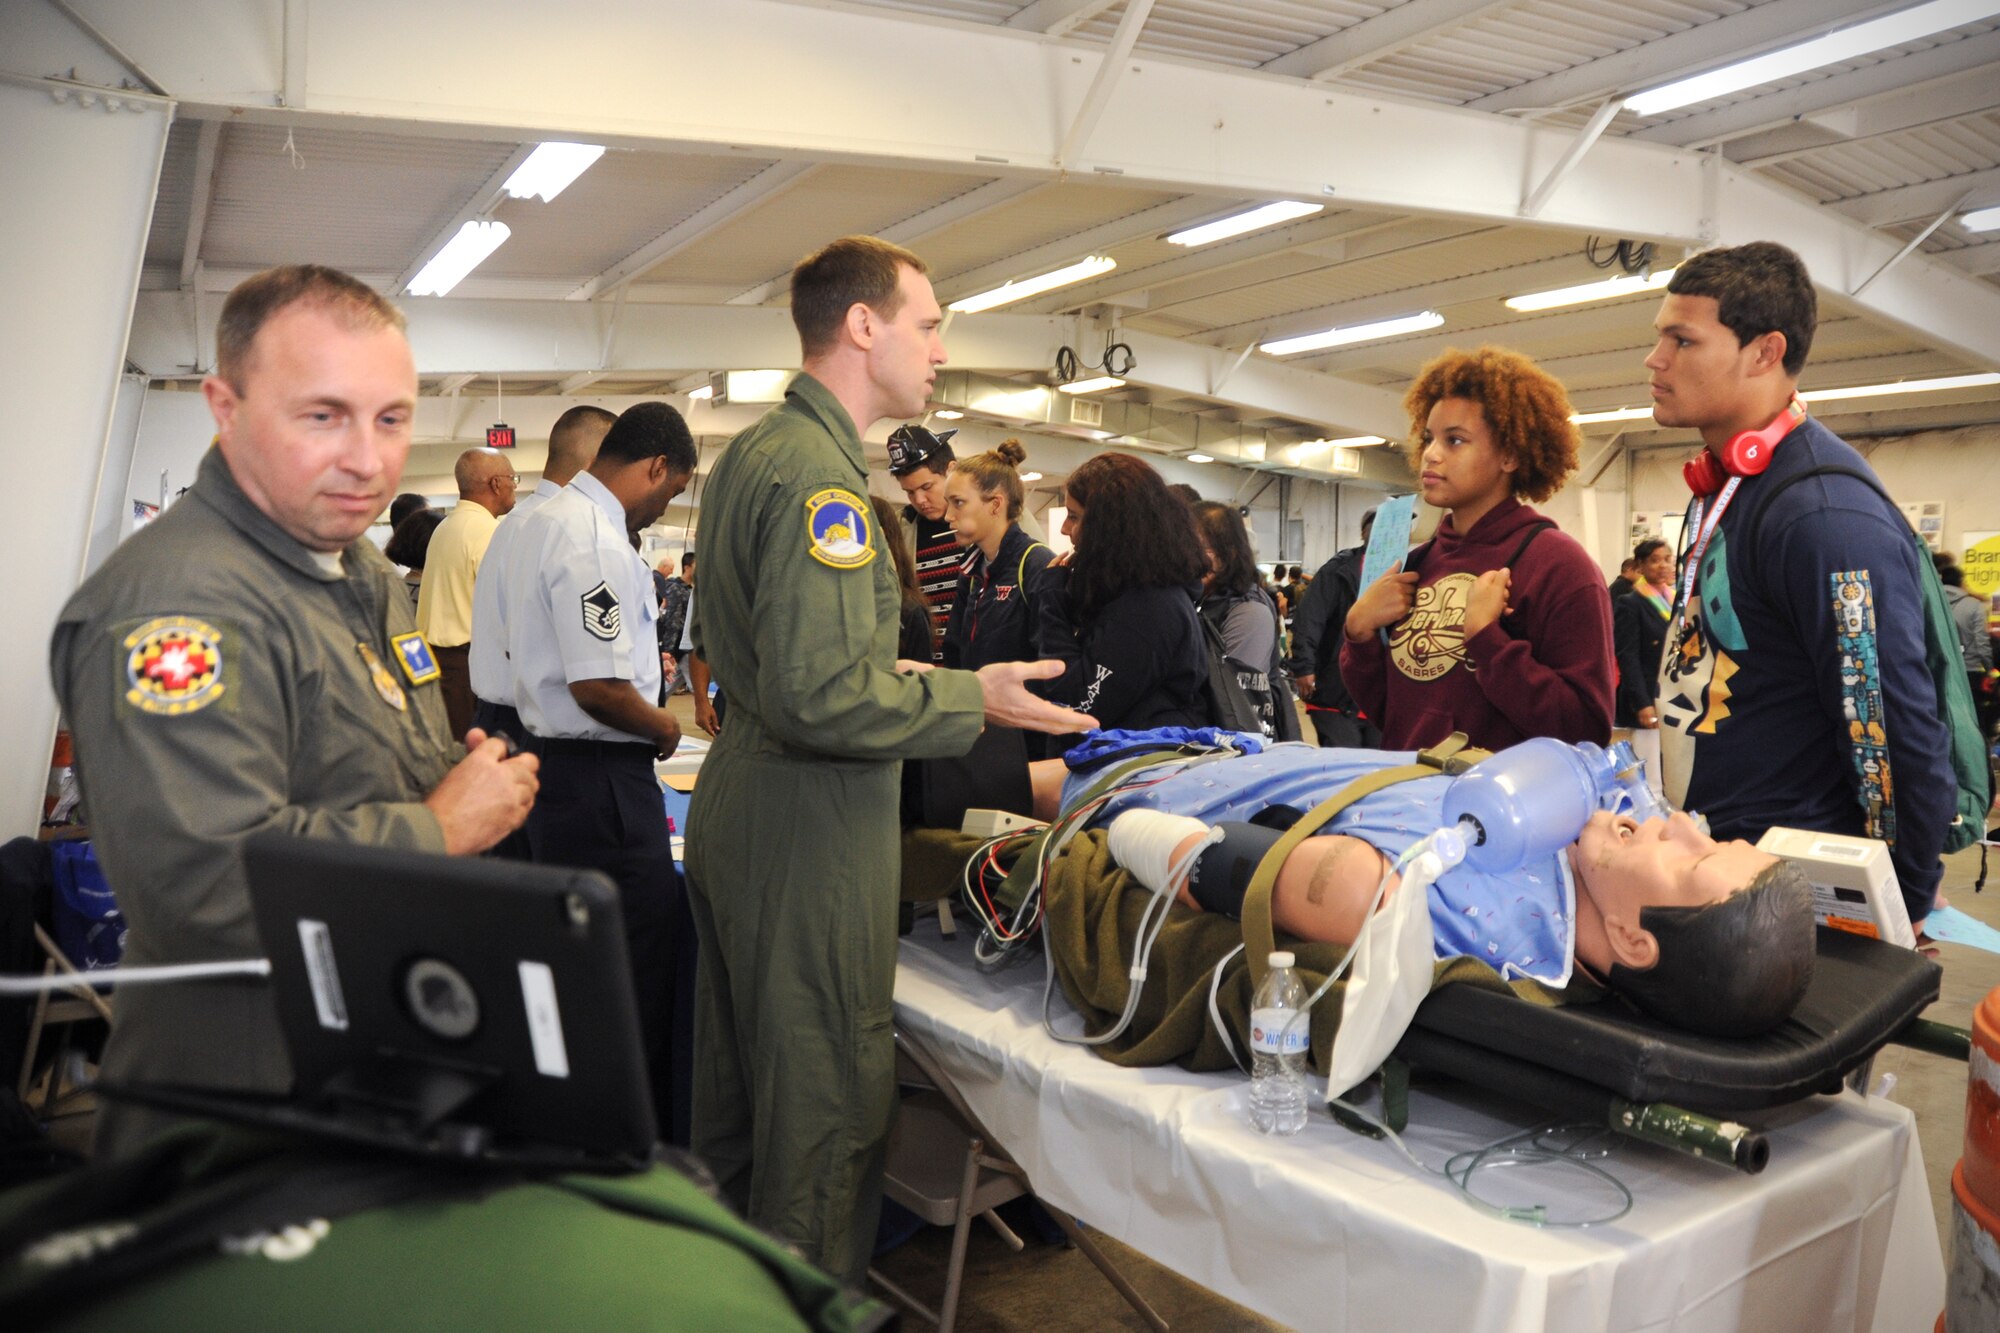 Members of the 459th Air Refueling Wing showcase their missions to a group of high school students at the Virginia Department of Transportation Career Fair in Manassas, Virginia, Thursday, Oct. 7, 2016. More than 1,400 students came out to talk with recruiters, a boom operator, aeromedical evacuation technician, and aeromedical staging squadron first sergeant about transportation-related careers in the Air Force Reserve and 459th ARW. (U.S.Air Force photo/Staff Sgt. Kat Justen)